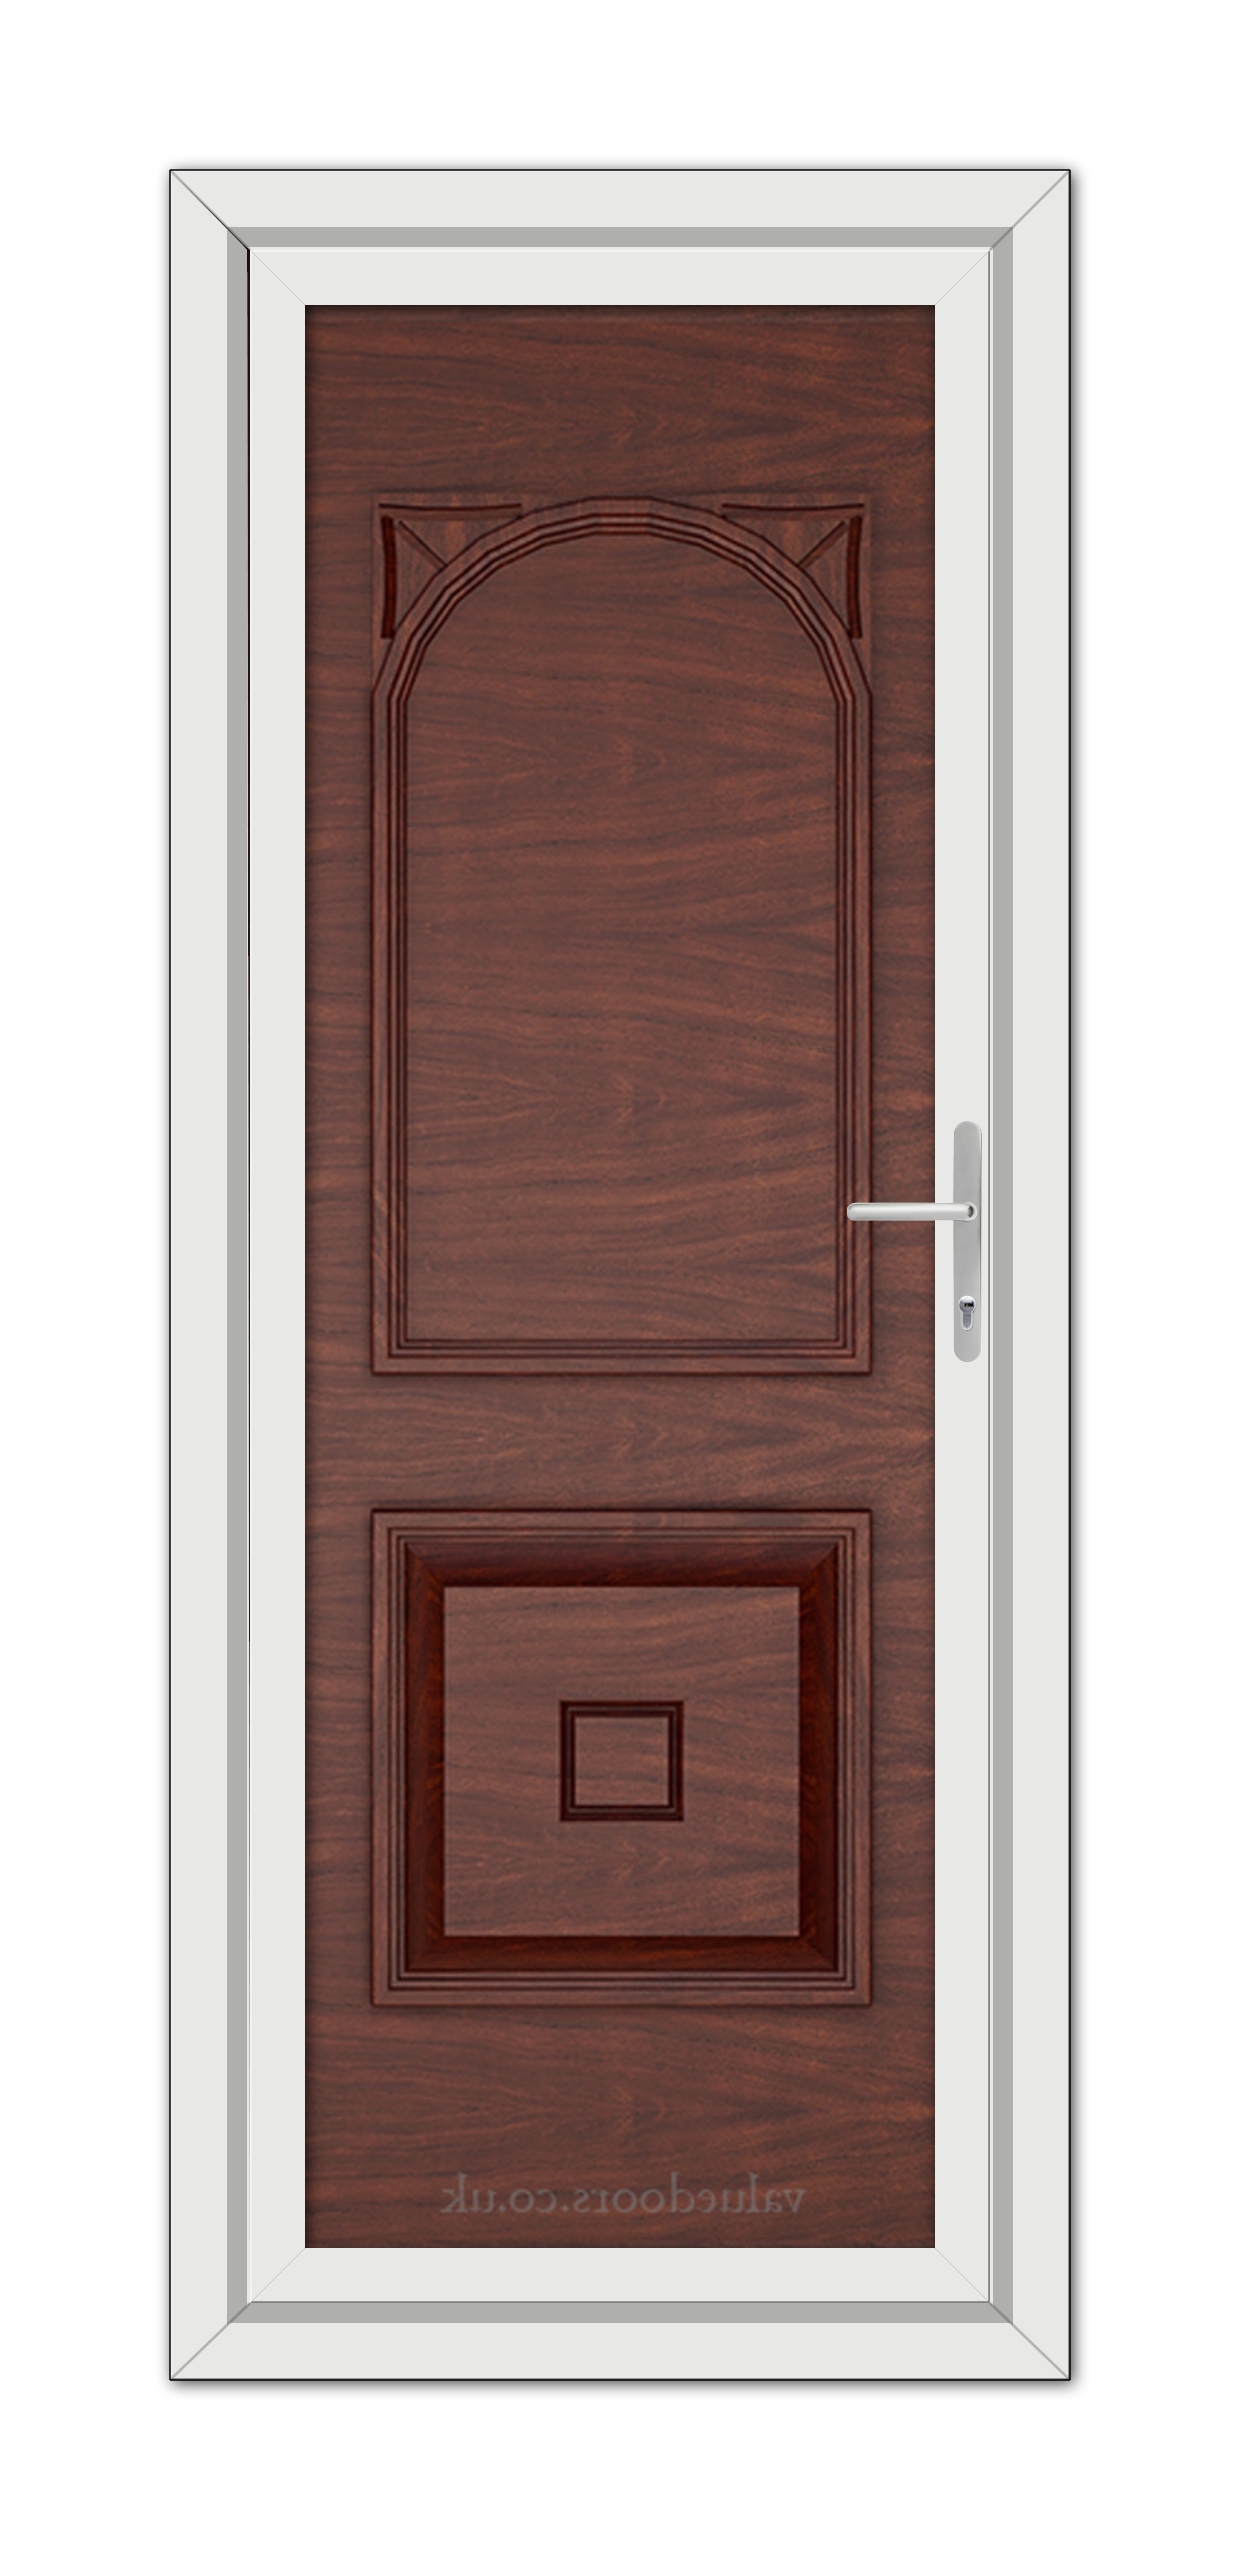 A close-up of a Rosewood Reims Solid uPVC Door.